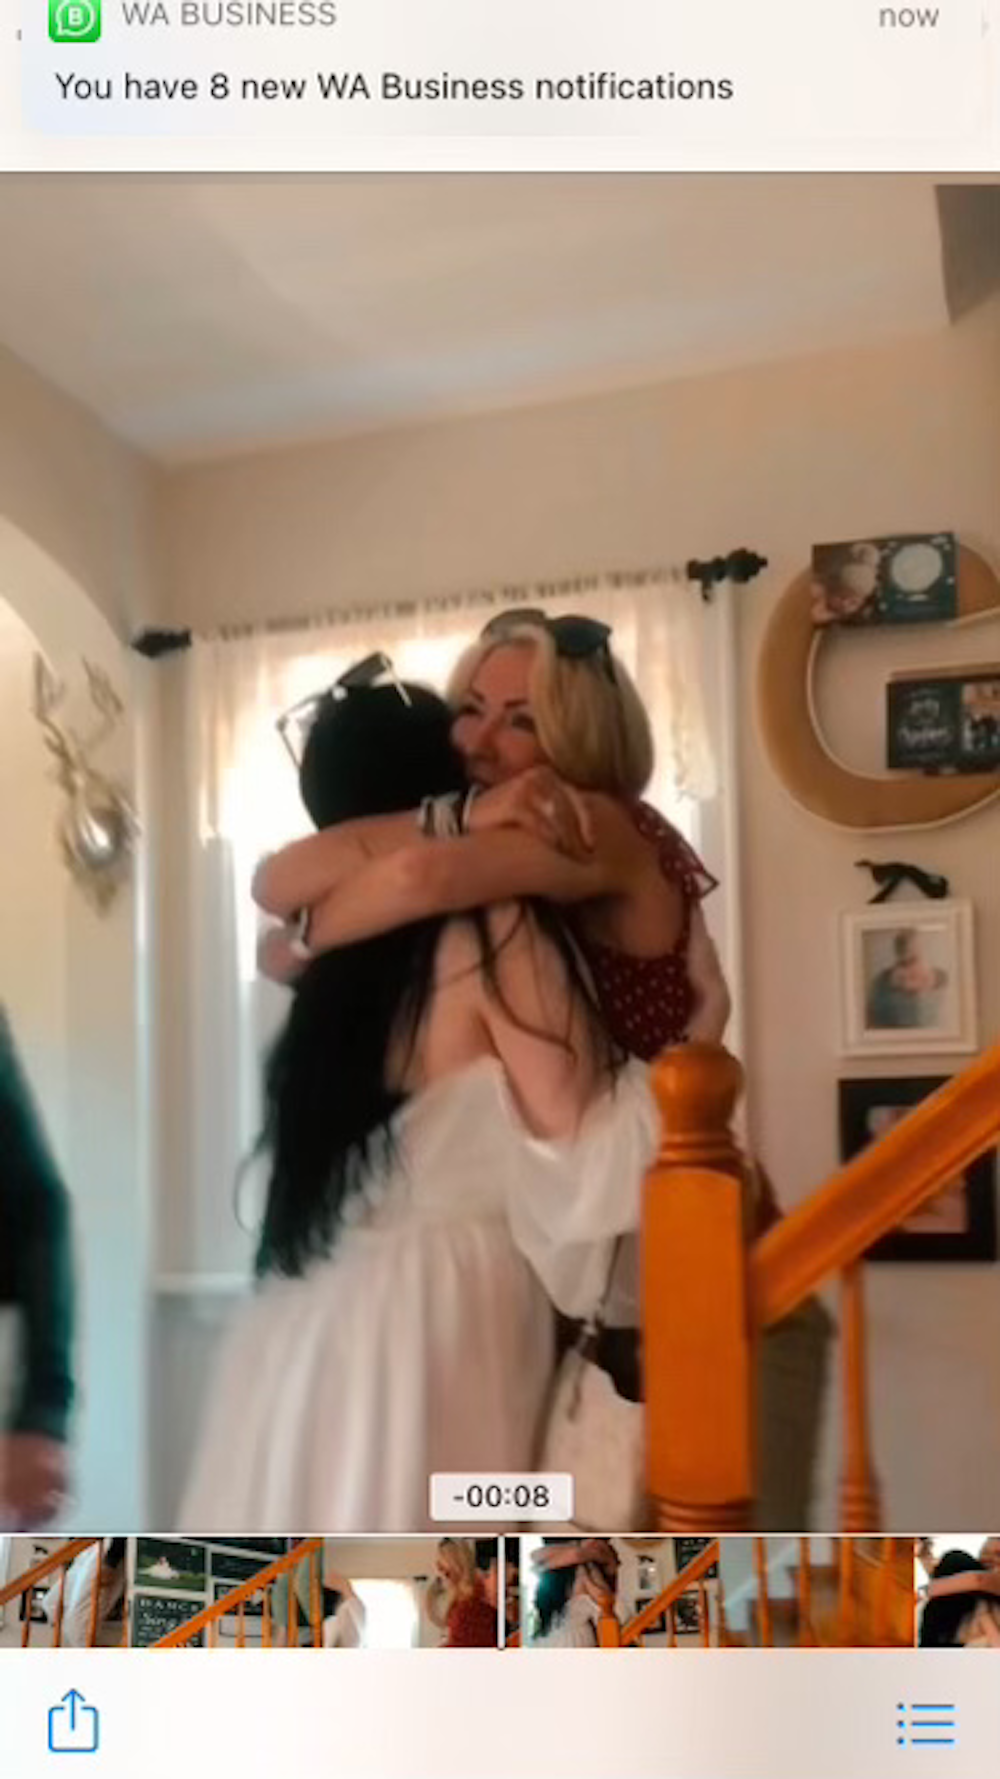 Yvette’s daughter victoria who lives in Toronto surprise visiting her on a trip to halifax, Yvette was so happy she was screaming with joy 💕💋 2022